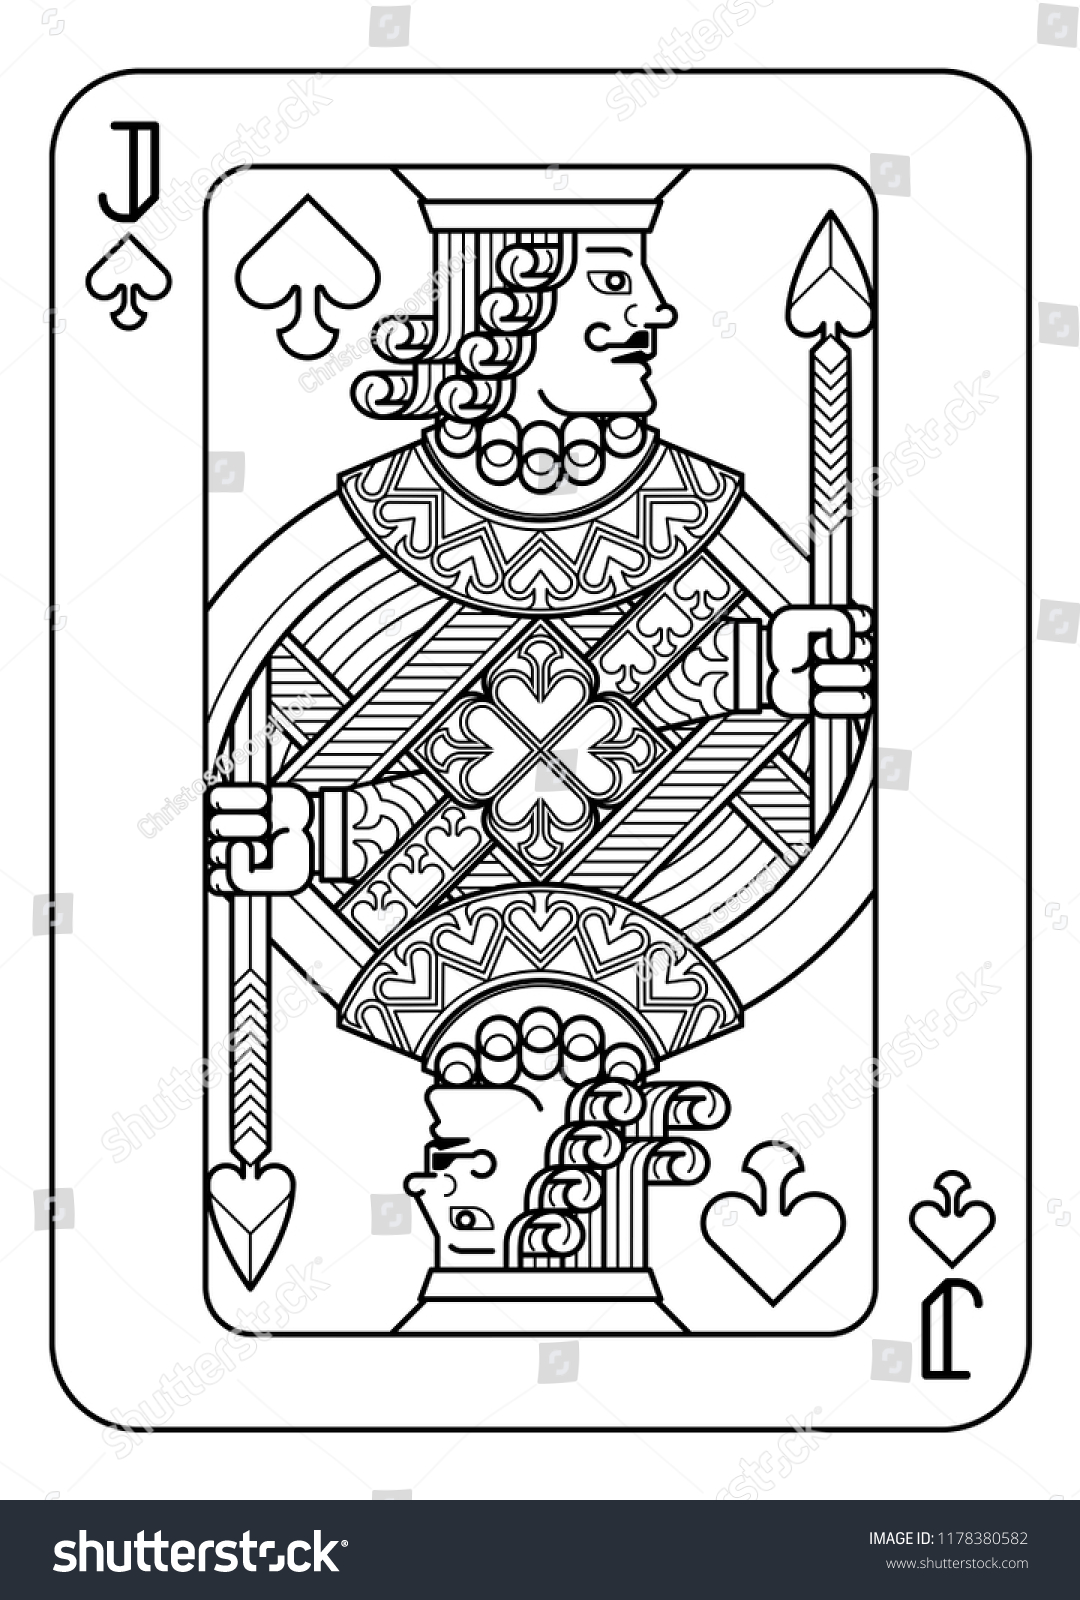 Playing Card Jack Spades Black White Stock Vector (Royalty Free) 1178380582